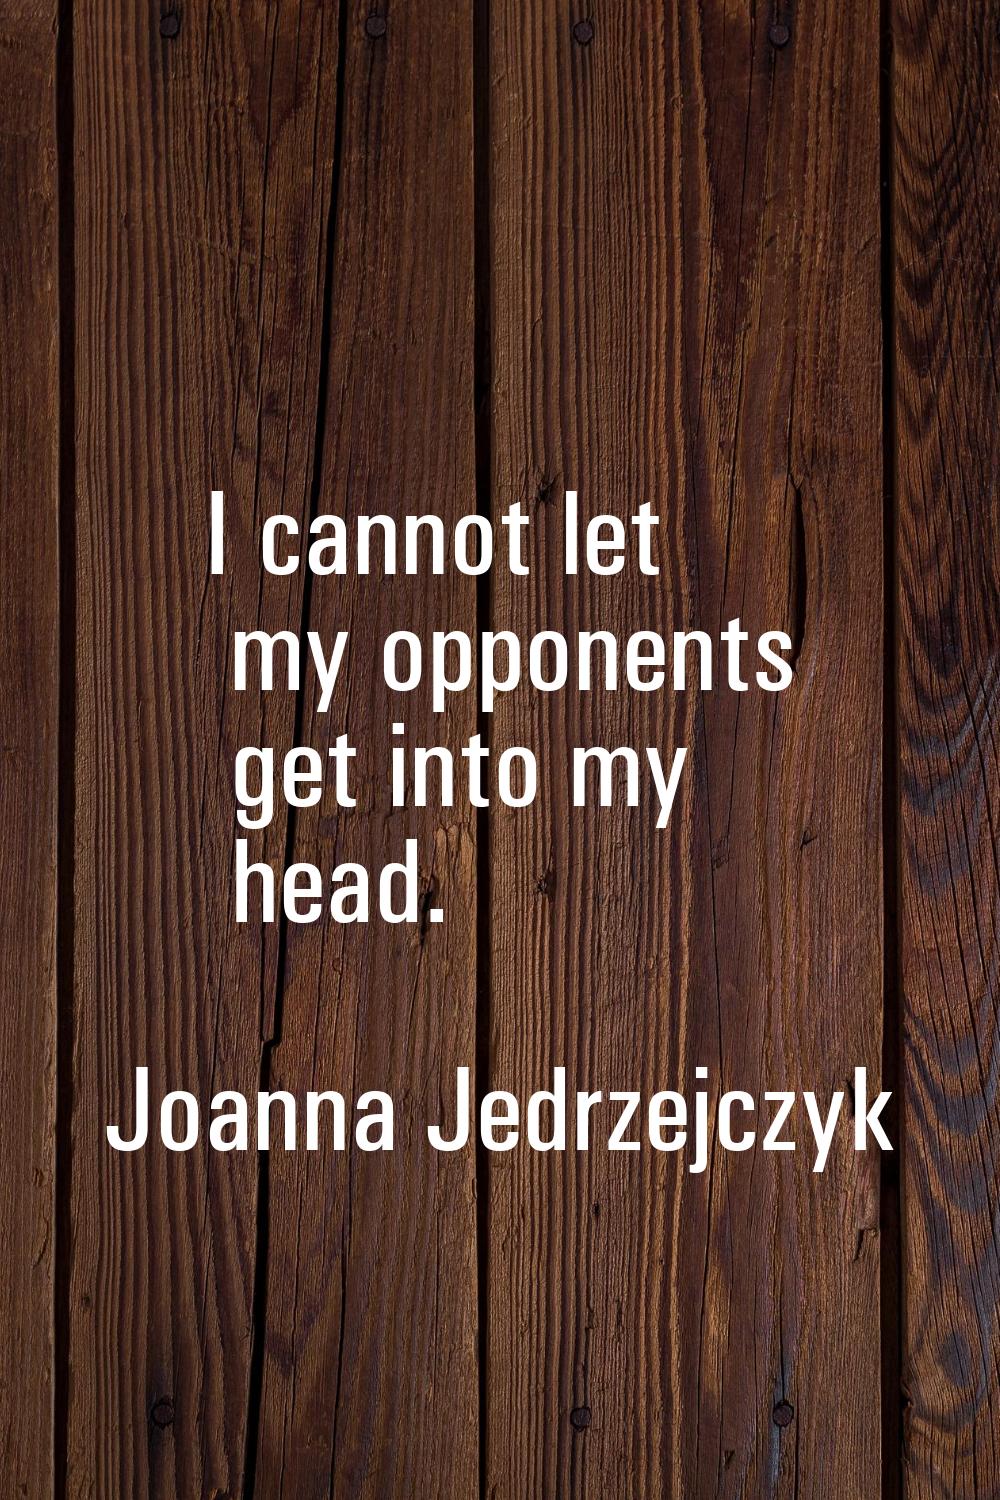 I cannot let my opponents get into my head.